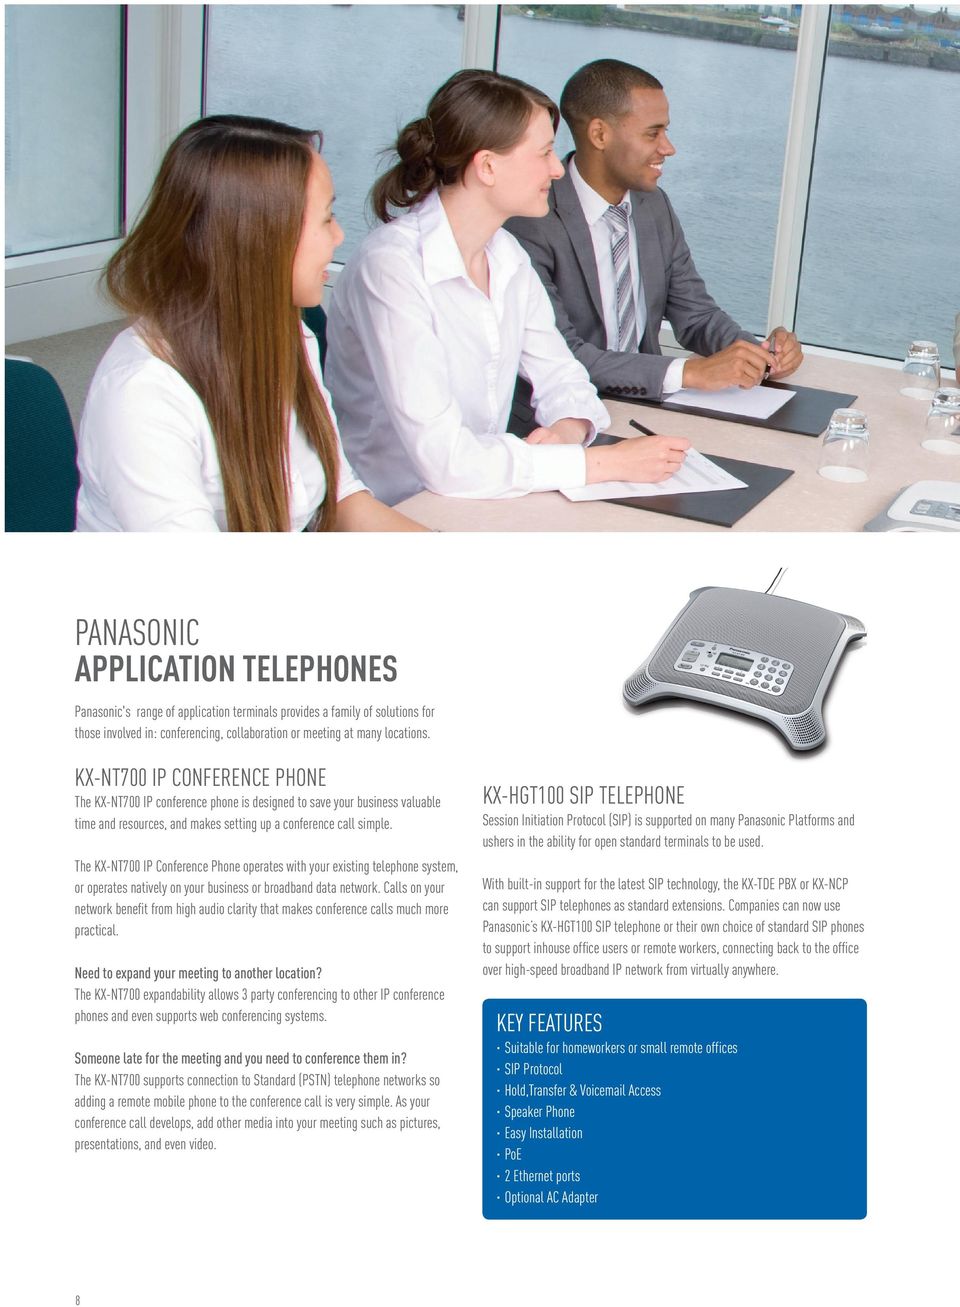 The KX-NT700 IP Conference Phone operates with your existing telephone system, or operates natively on your business or broadband data network.